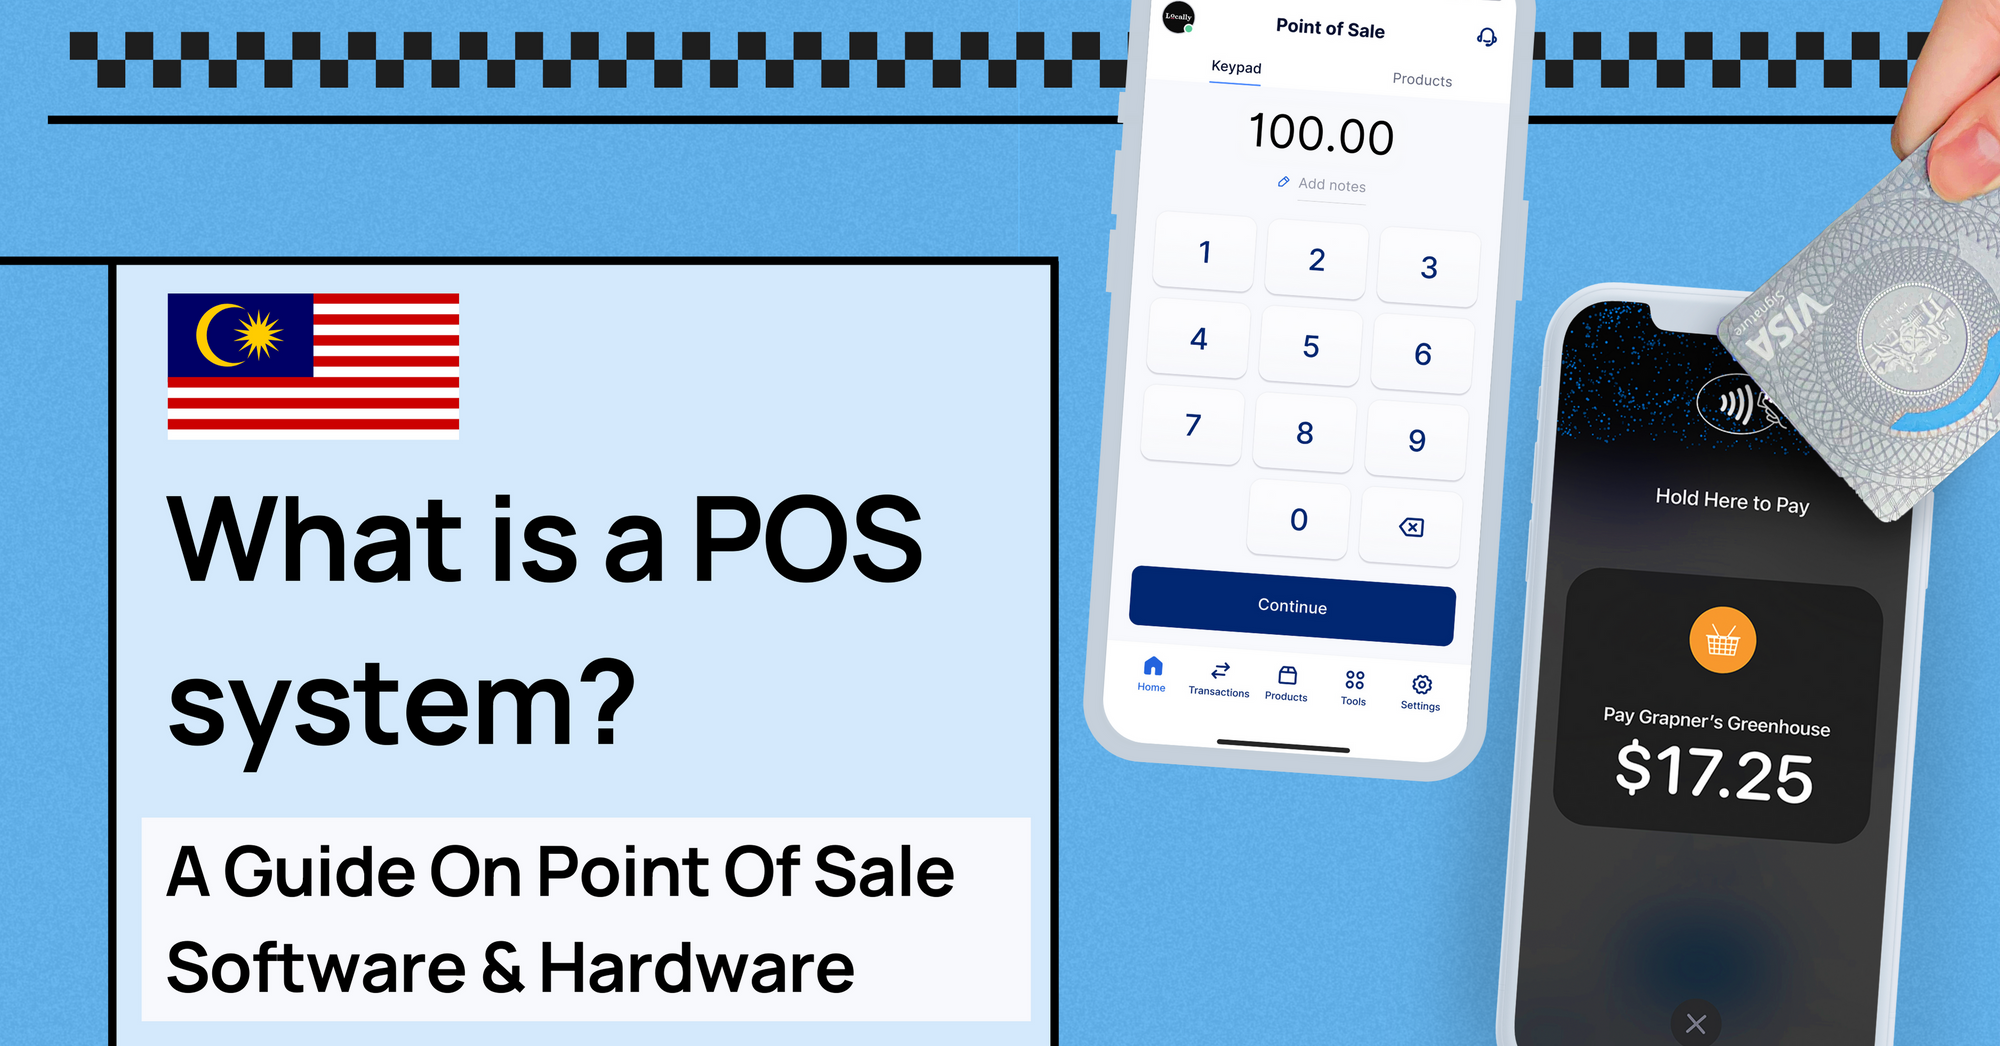 How to integrate Payment Processing with a POS System